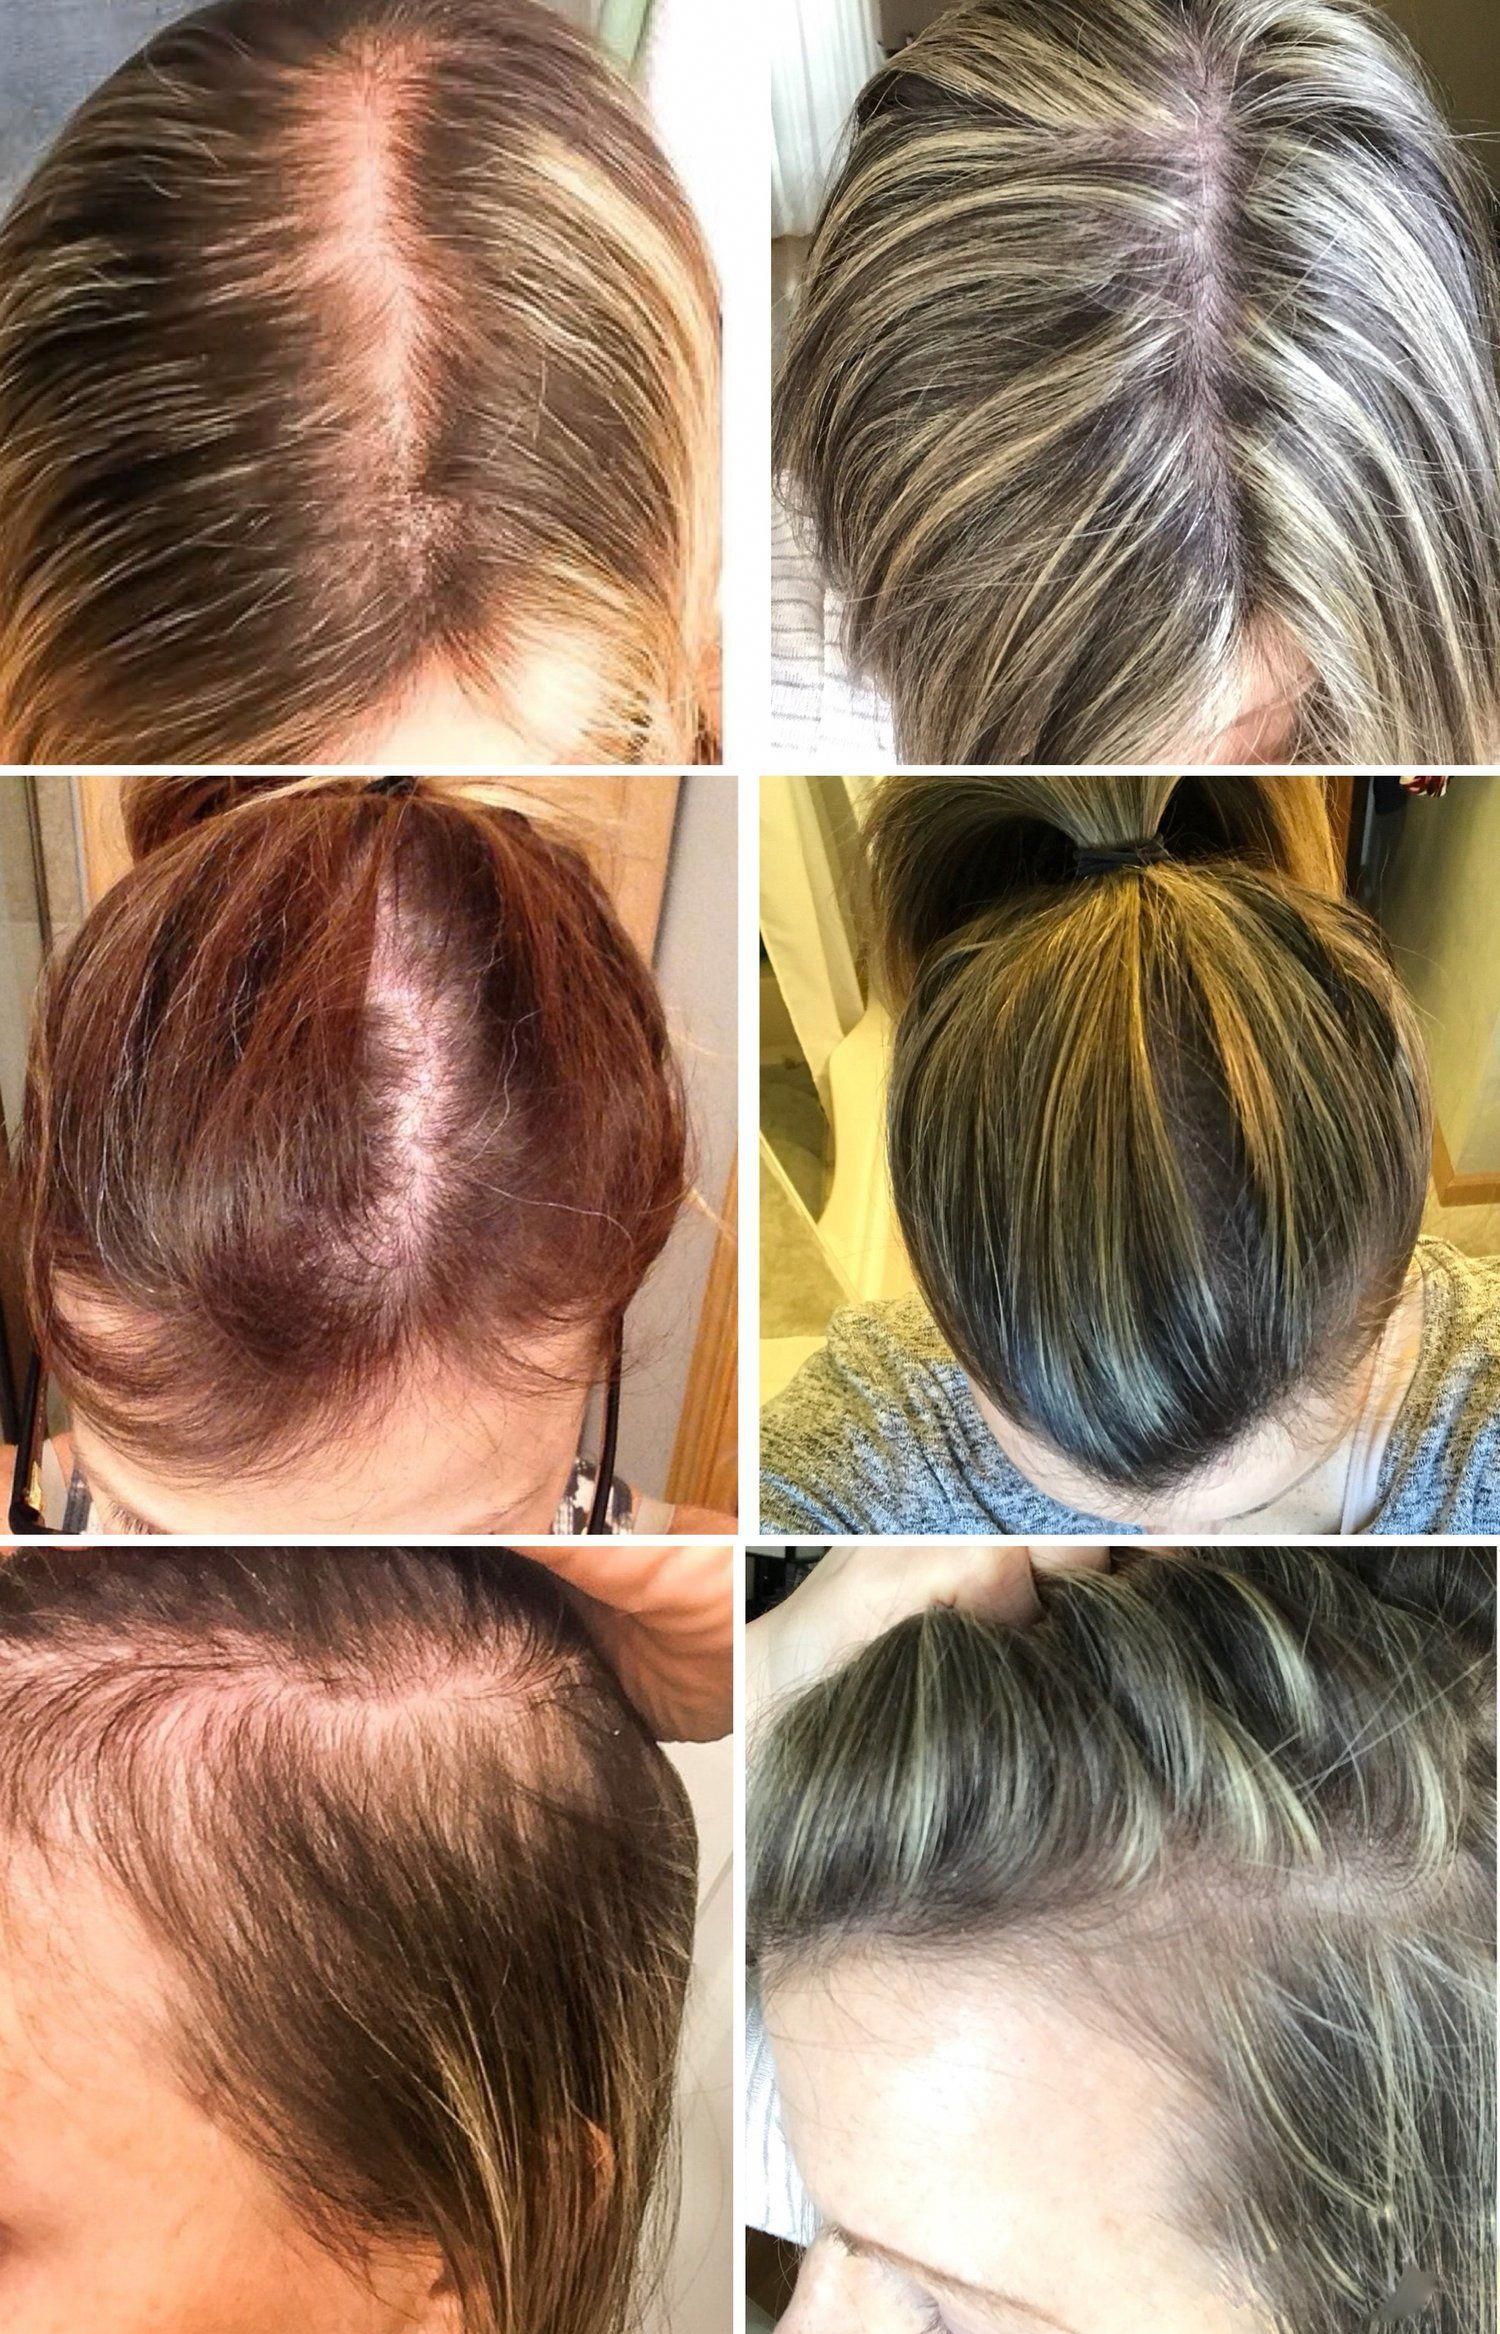 How Much Hair Loss Is Normal During Postpartum